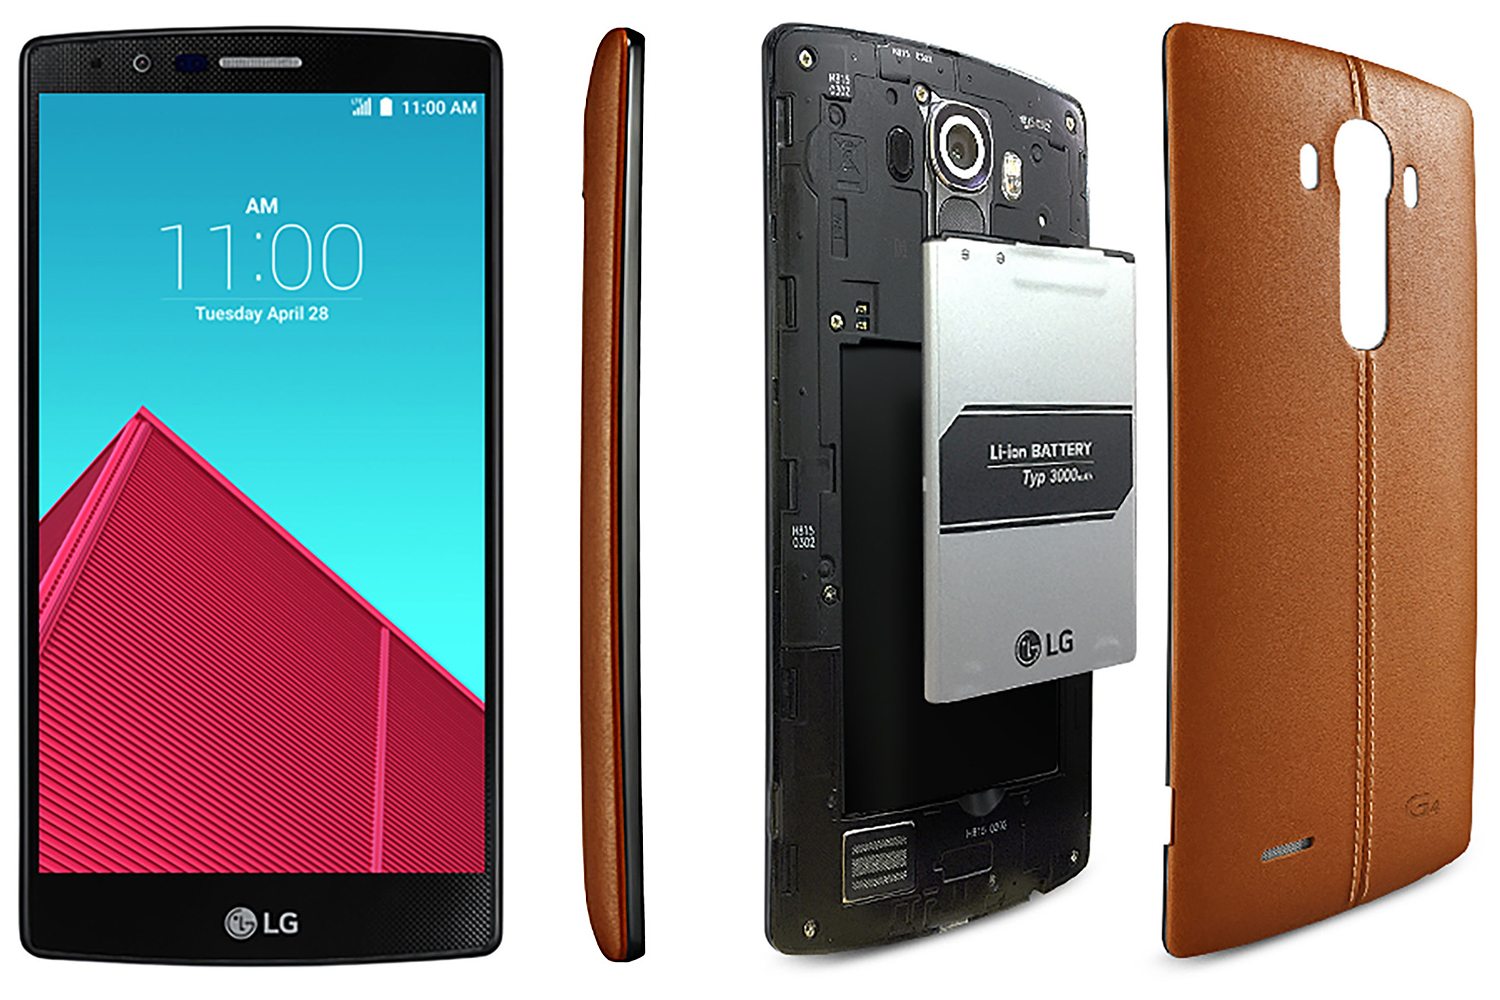 LG G4 Gets Android 6.0 Marshmallow on US Cellular - MobiPicker